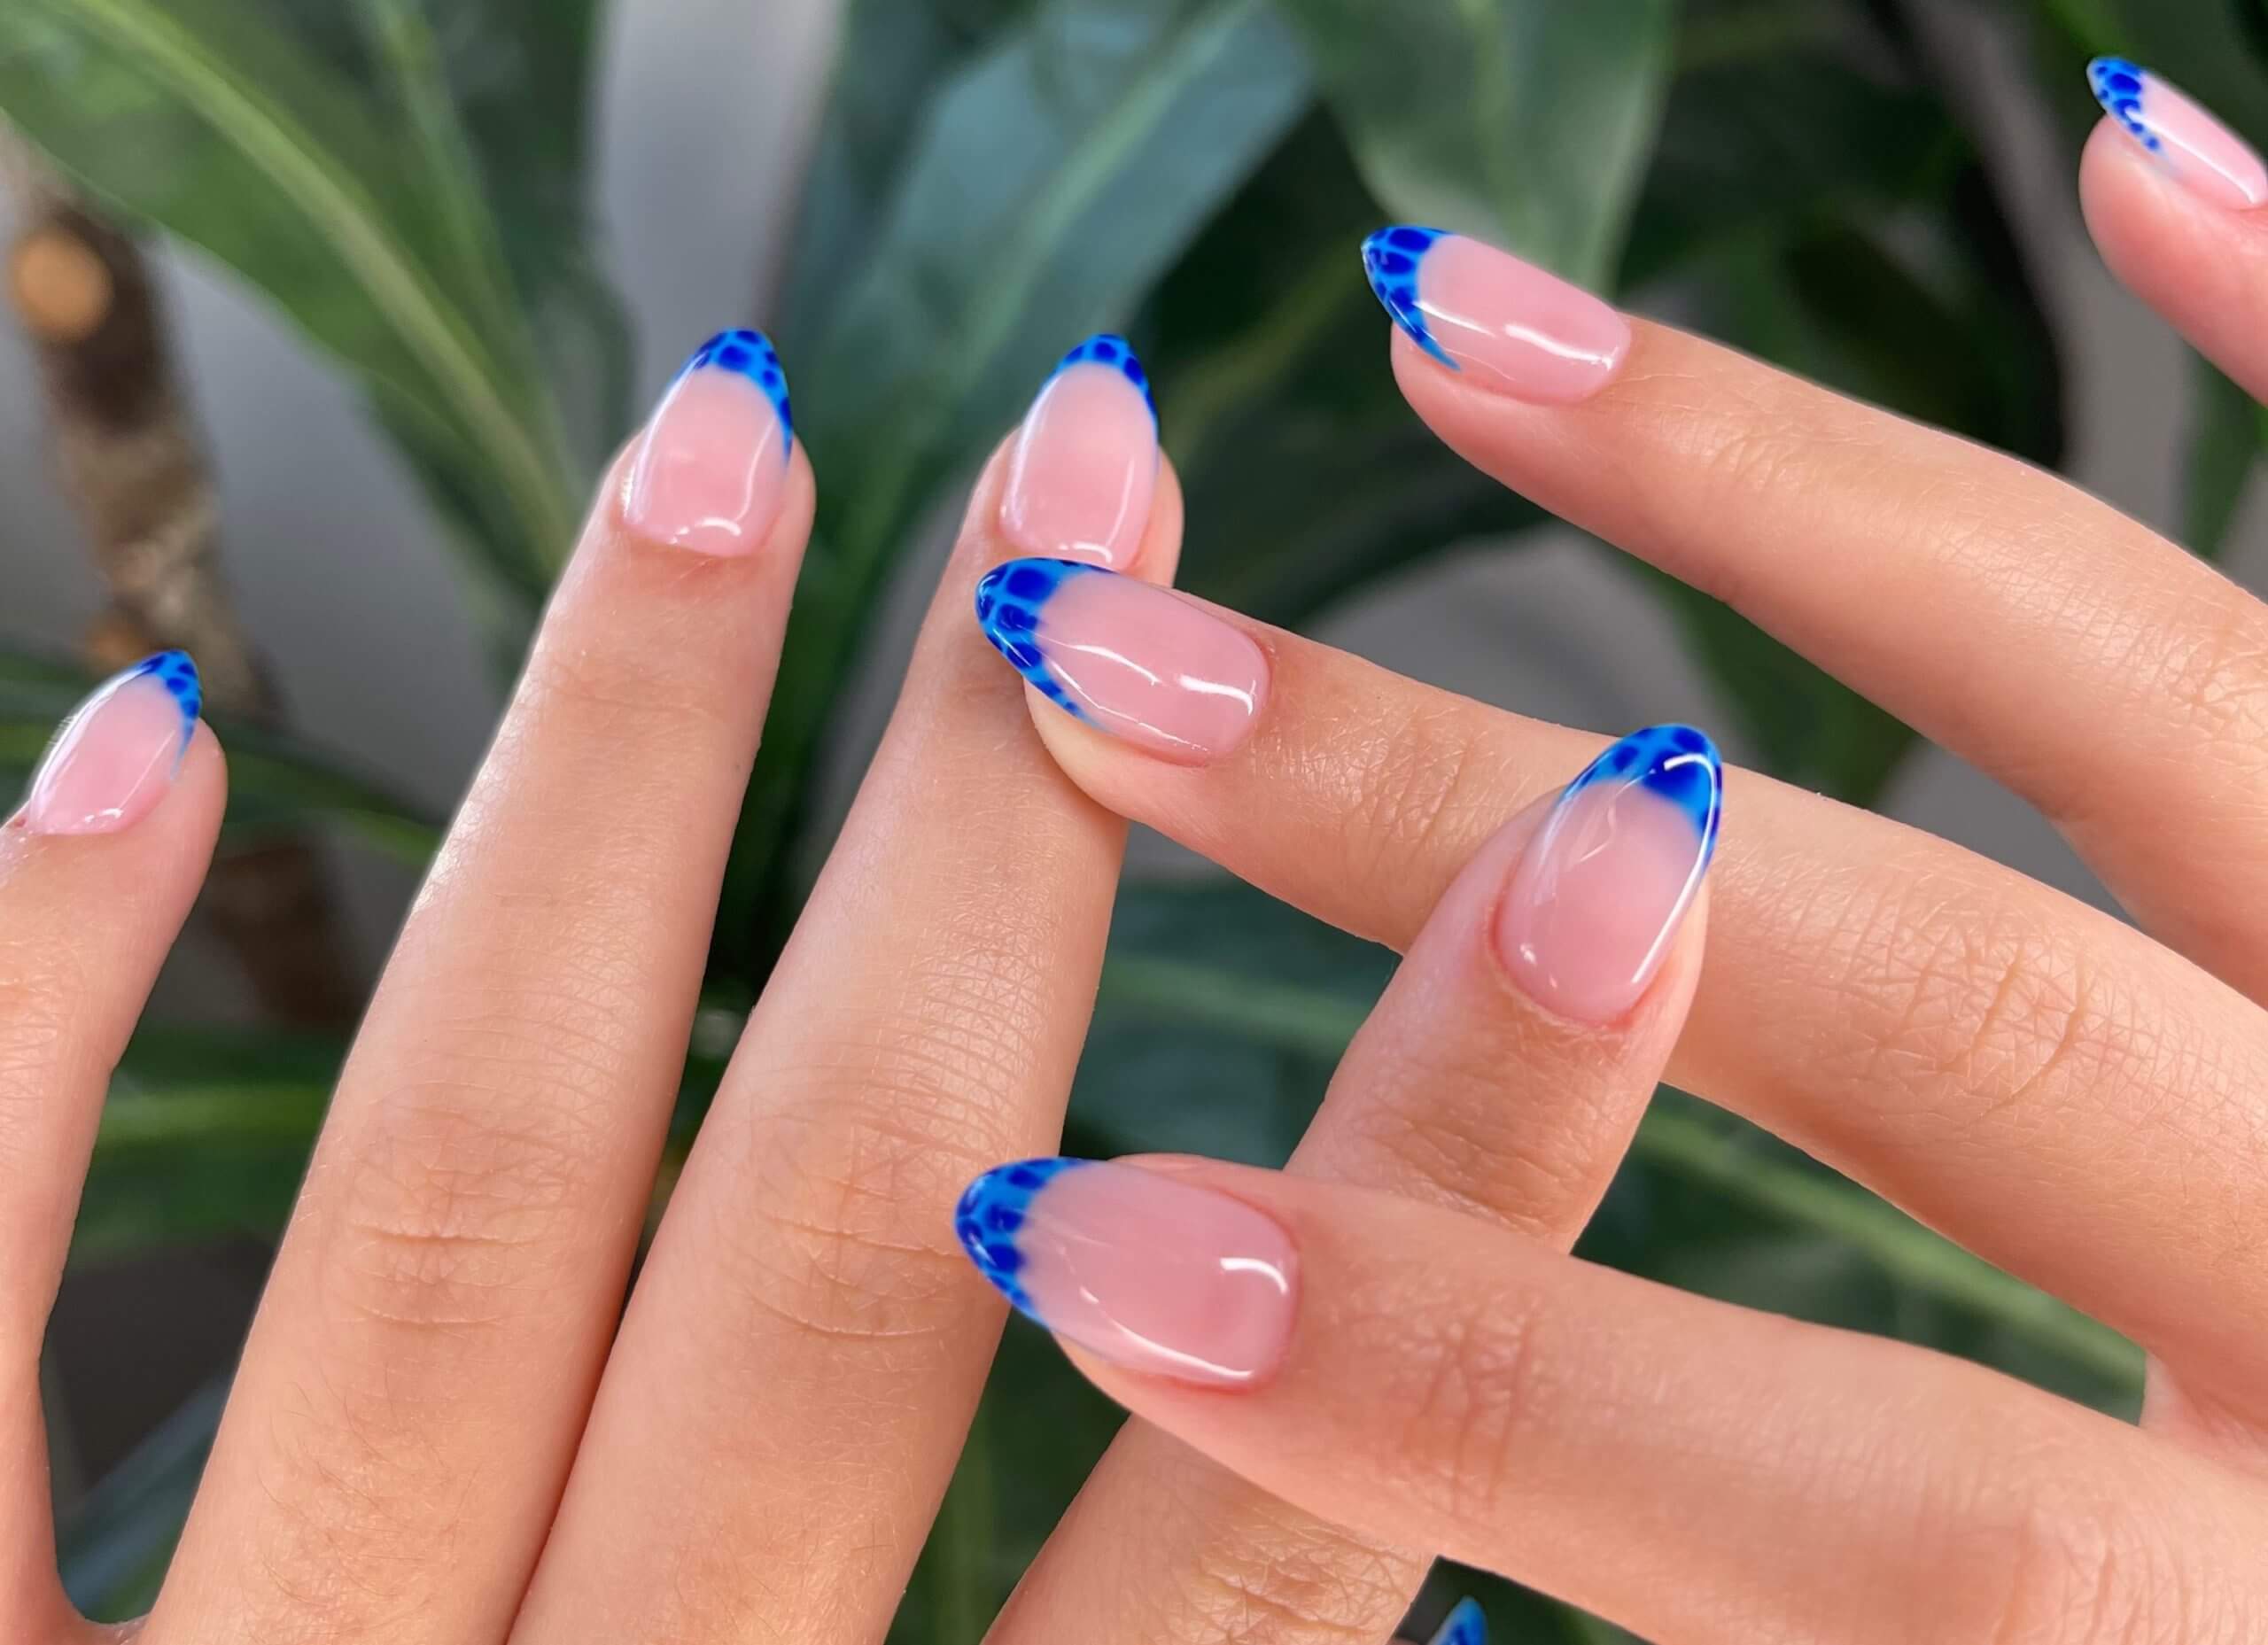 4. Fast and Fun Nail Designs to Try - wide 8